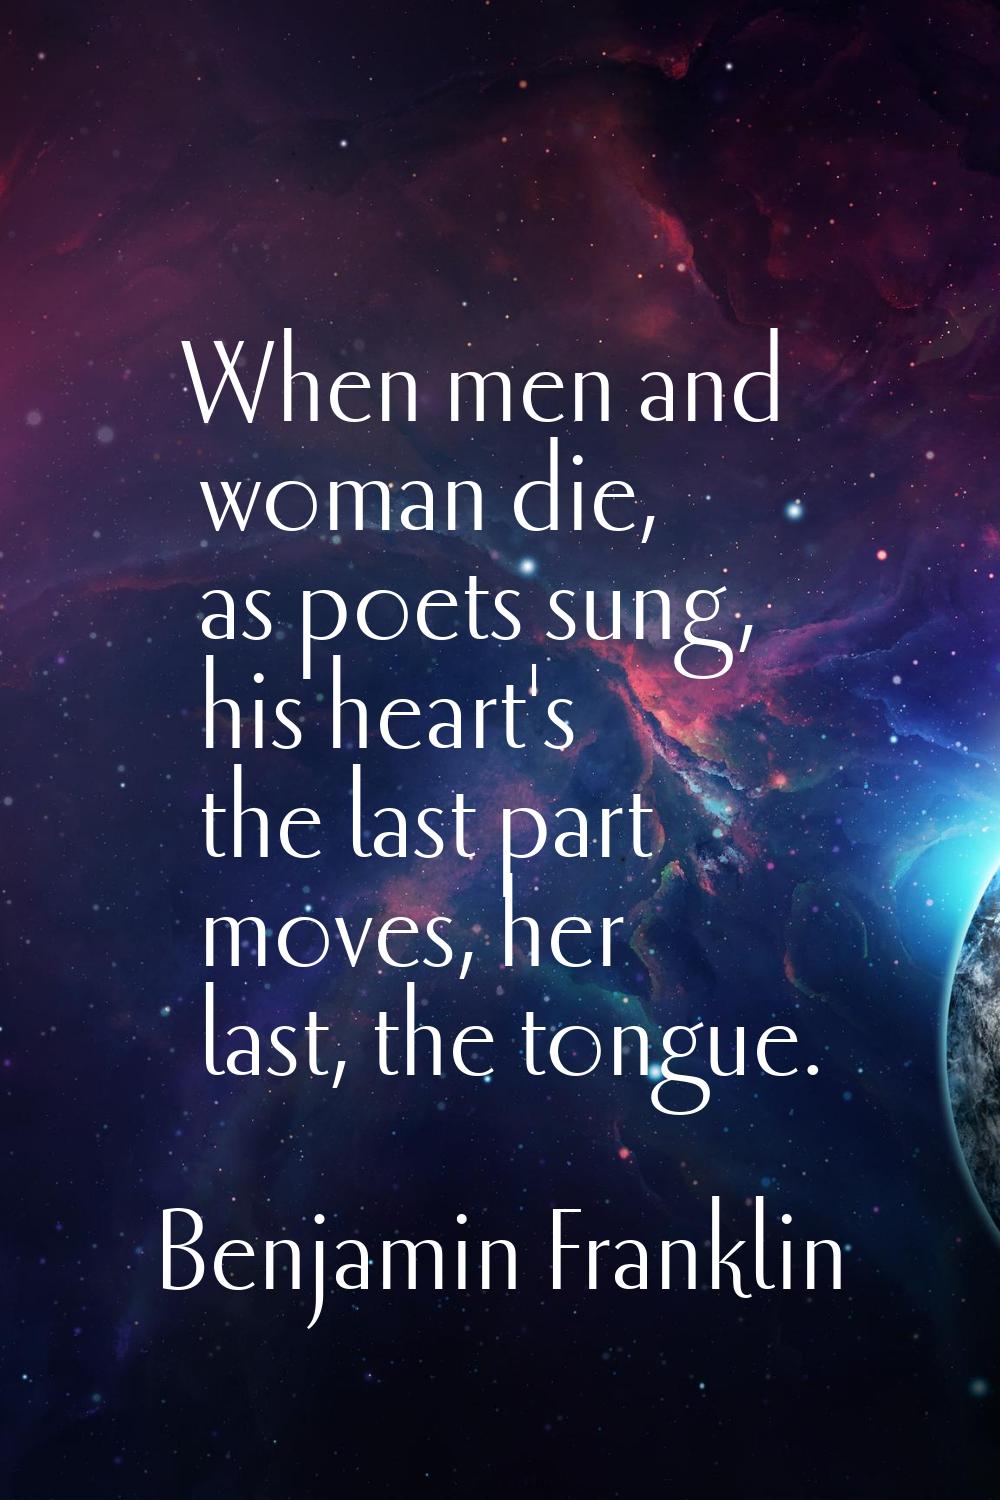 When men and woman die, as poets sung, his heart's the last part moves, her last, the tongue.